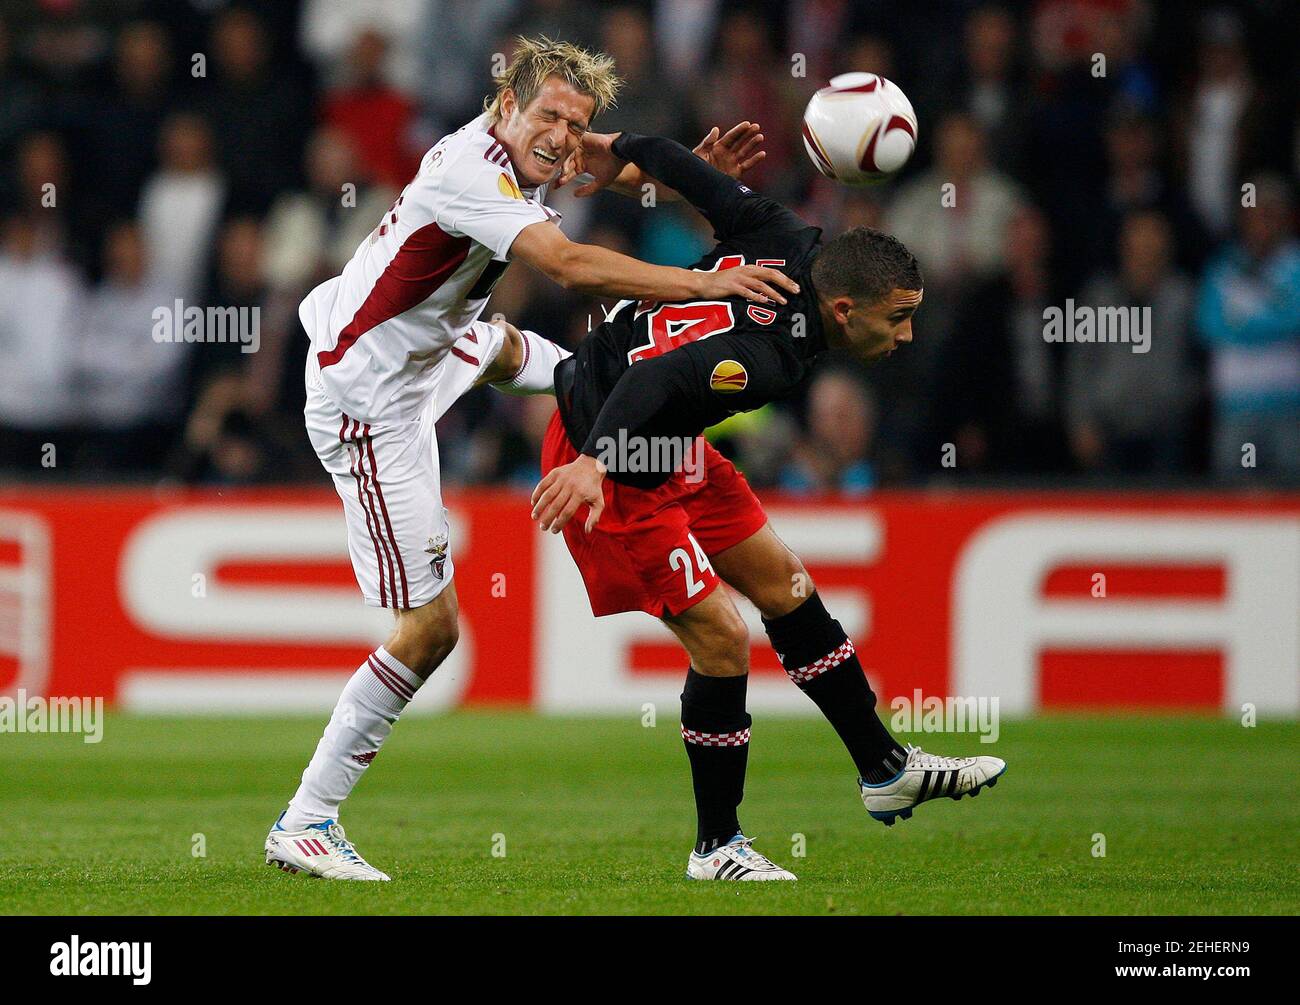 Football Psv Eindhoven V Sl Benfica Uefa Europa League Quarter Final Second Leg Philips Stadion Eindhoven Holland 10 11 14 4 11 Psv S Zakaria Labyad In Action Against Benfica S Fabio Coentrao [ 1005 x 1300 Pixel ]